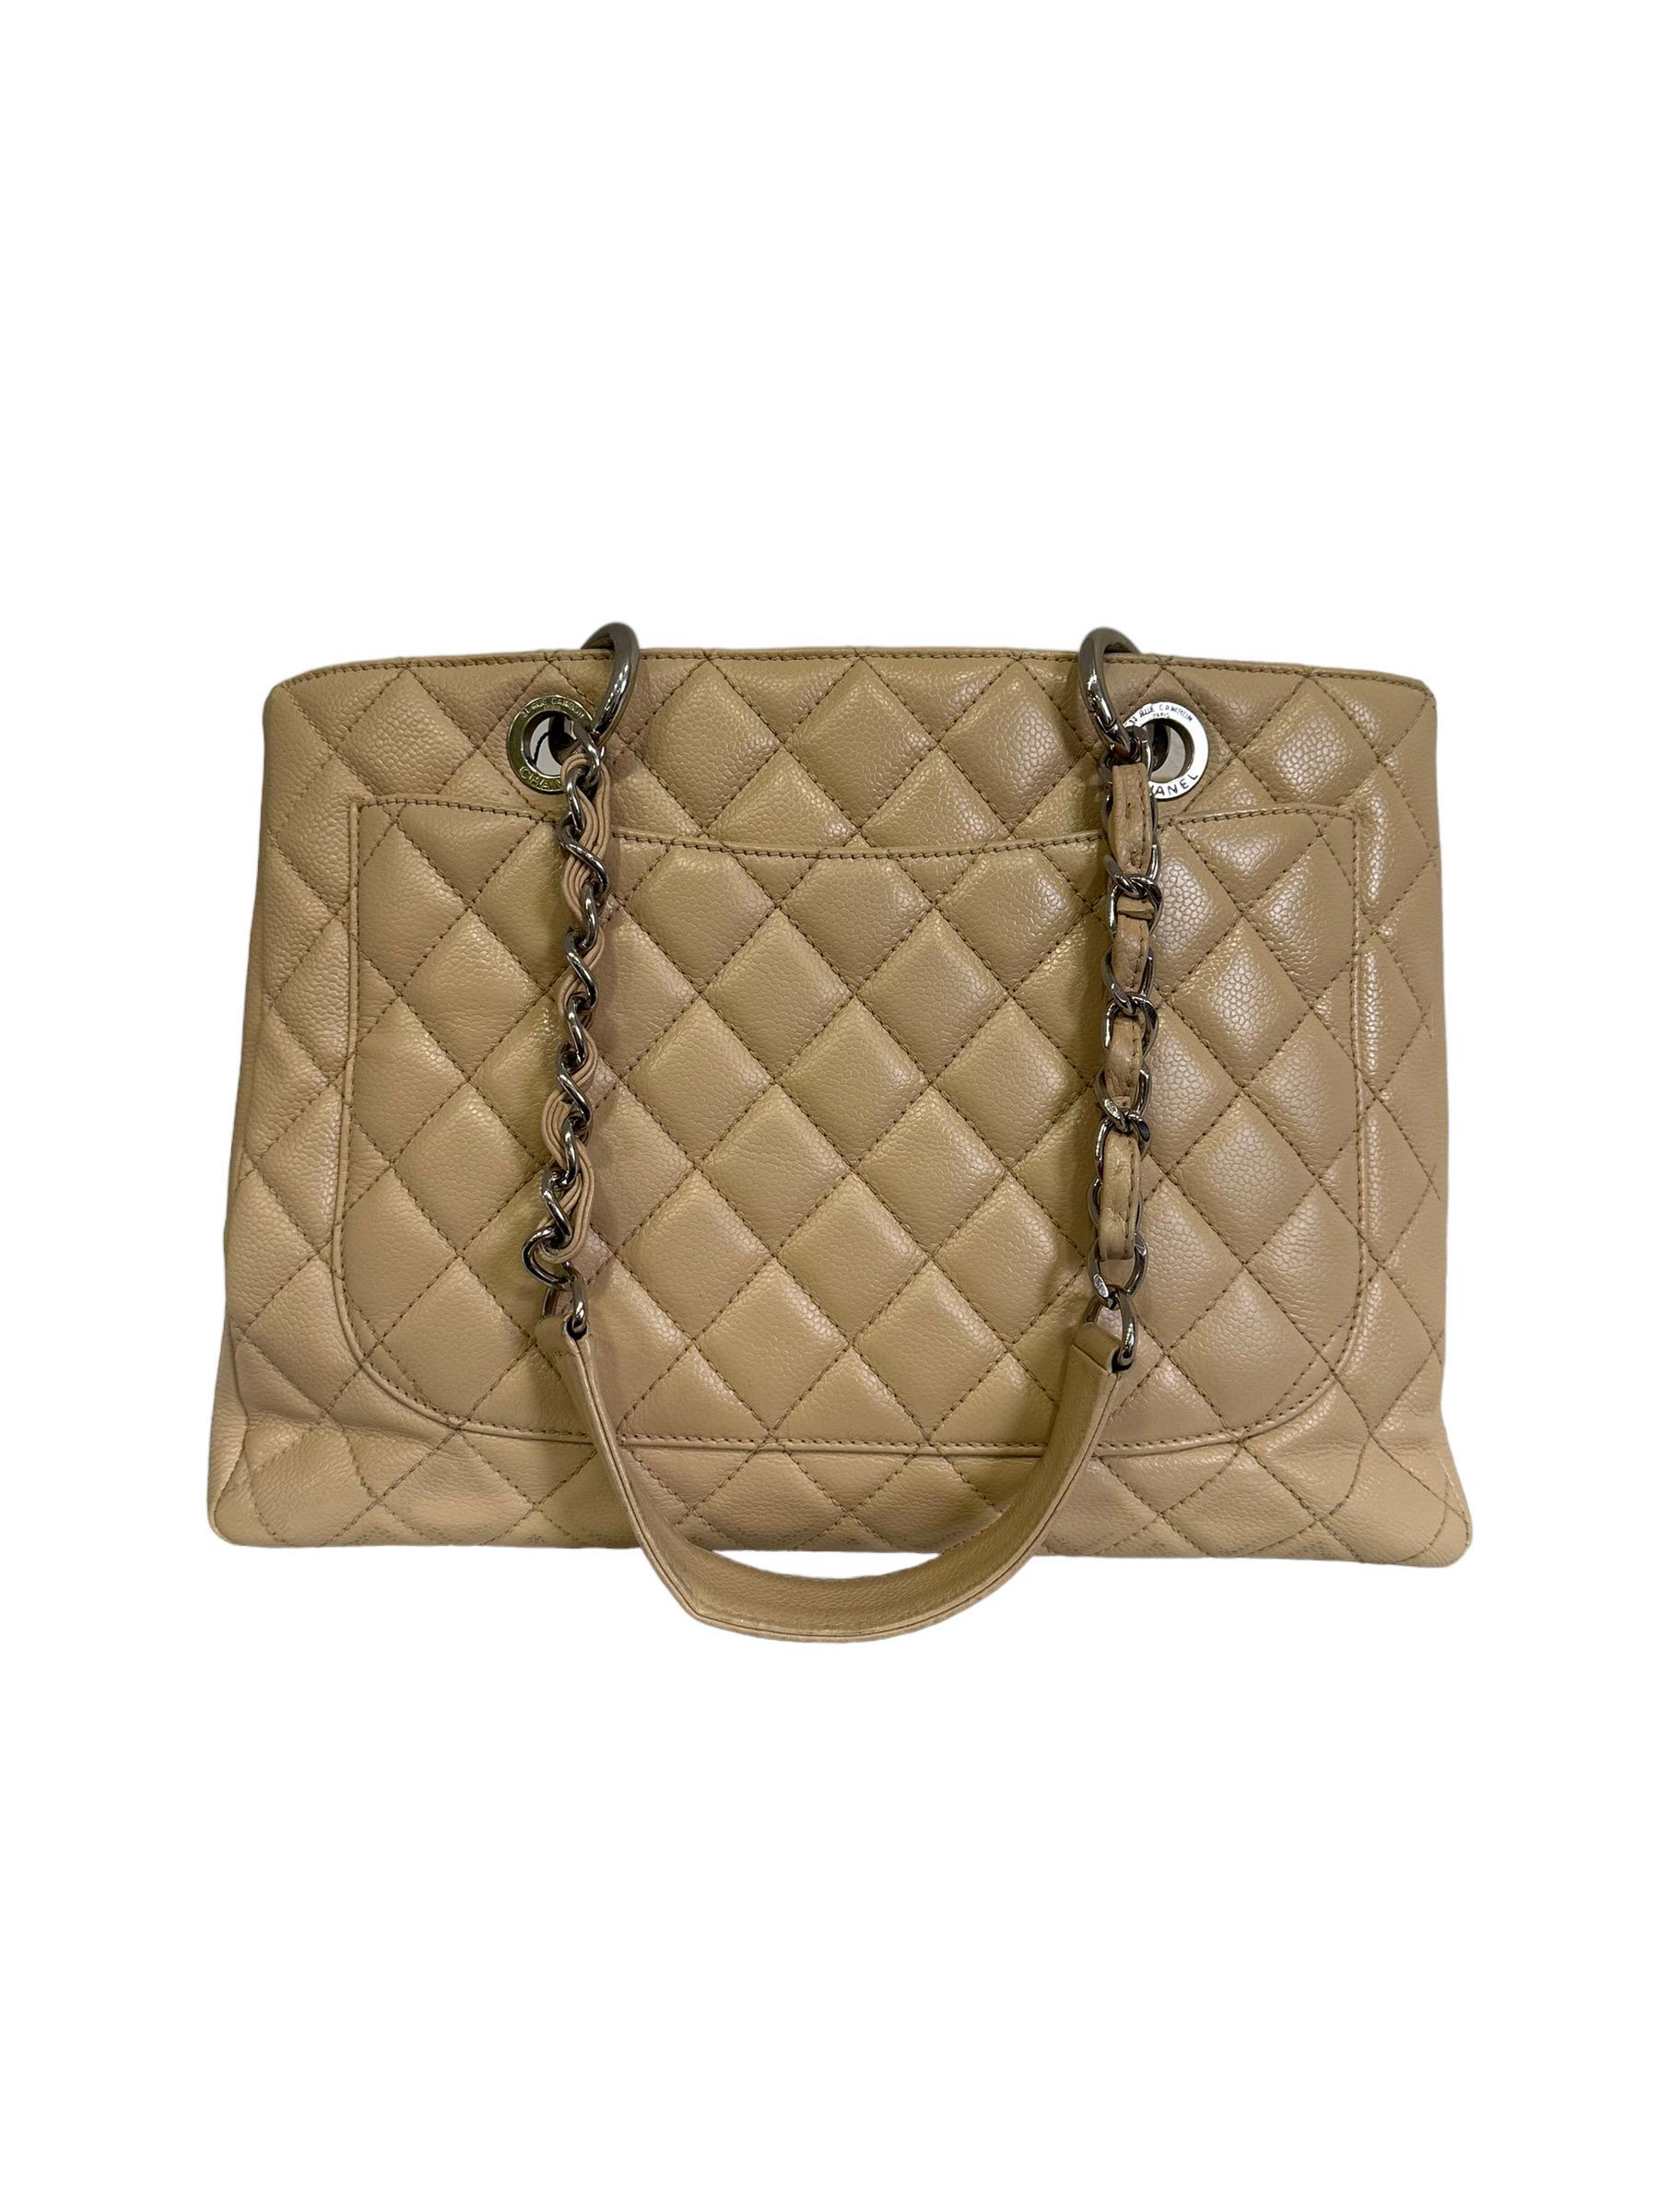 2014 Chanel Beige Leather GST Shoulder Bag In Good Condition For Sale In Torre Del Greco, IT